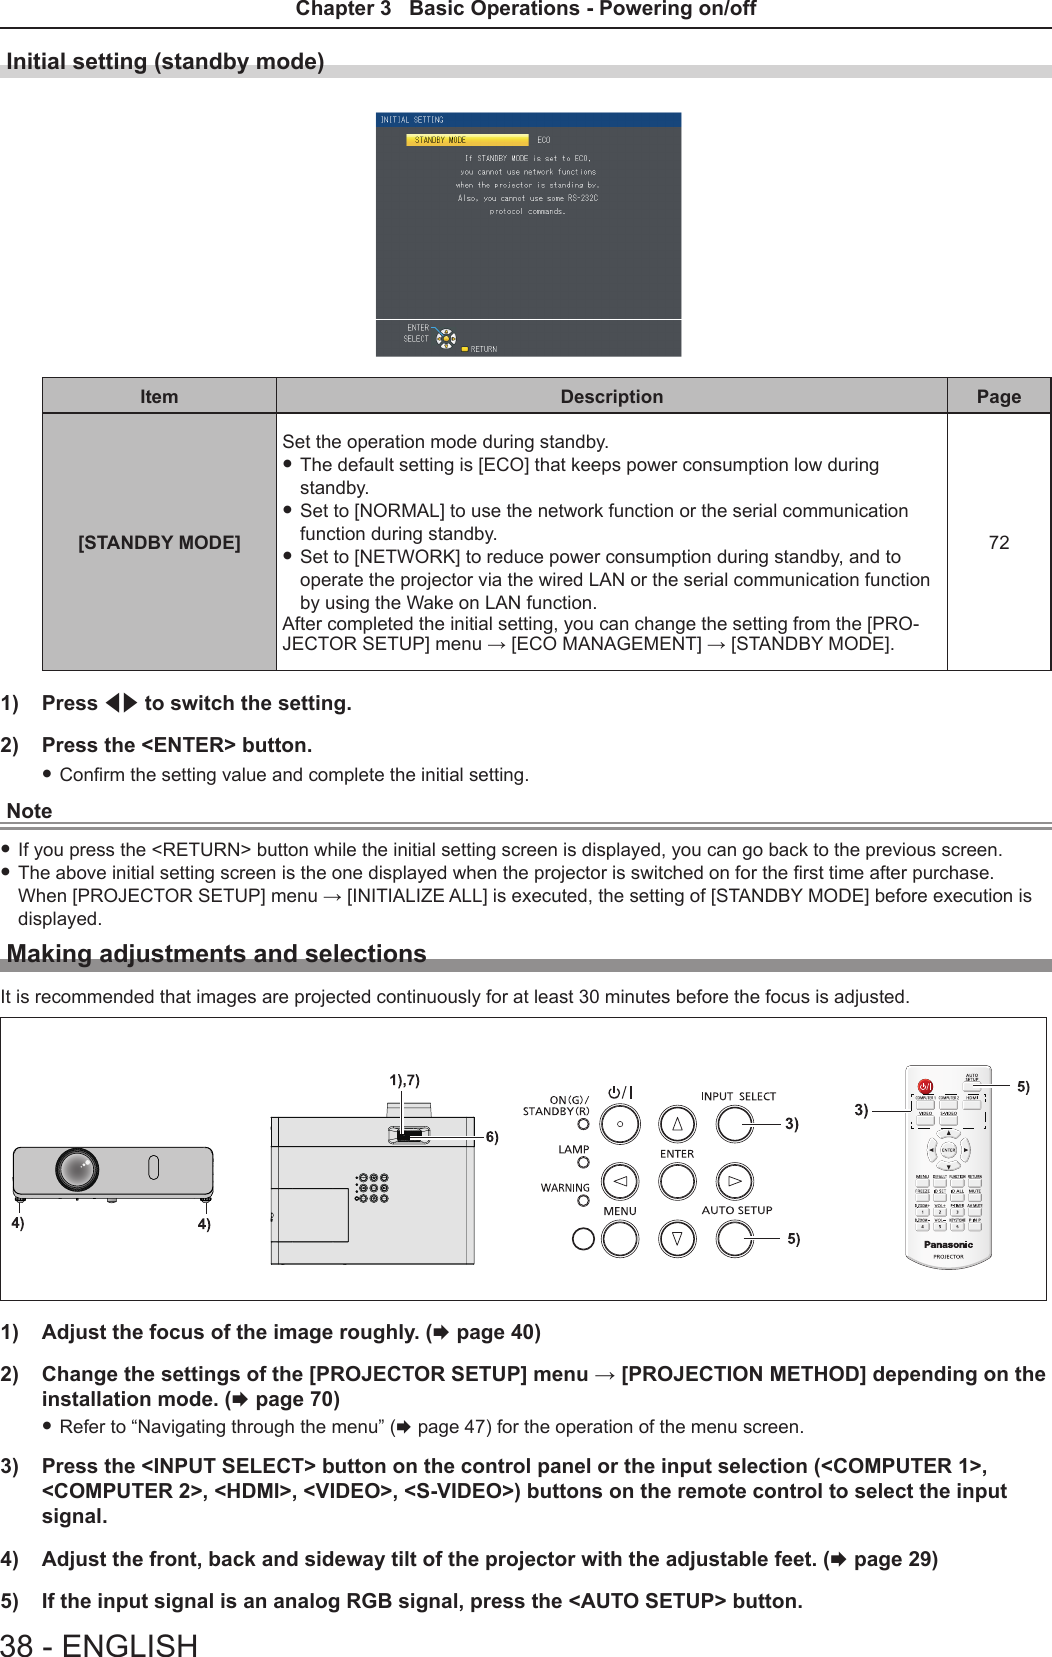 Initial setting (standby mode)Item Description Page[STANDBY MODE] Set the operation mode during standby.  f The default setting is [ECO] that keeps power consumption low during standby. f Set to [NORMAL] to use the network function or the serial communication function during standby.  f Set to [NETWORK] to reduce power consumption during standby, and to operate the projector via the wired LAN or the serial communication function by using the Wake on LAN function.After completed the initial setting, you can change the setting from the [PRO-JECTOR SETUP] menu → [ECO MANAGEMENT] → [STANDBY MODE].721)  Press qw to switch the setting.2)  Press the &lt;ENTER&gt; button. fConrm the setting value and complete the initial setting.Note fIf you press the &lt;RETURN&gt; button while the initial setting screen is displayed, you can go back to the previous screen. fThe above initial setting screen is the one displayed when the projector is switched on for the rst time after purchase. When [PROJECTOR SETUP] menu → [INITIALIZE ALL] is executed, the setting of [STANDBY MODE] before execution is displayed.Making adjustments and selectionsIt is recommended that images are projected continuously for at least 30 minutes before the focus is adjusted.1)  Adjust the focus of the image roughly. (x page 40)2)  Change the settings of the [PROJECTOR SETUP] menu → [PROJECTION METHOD] depending on the installation mode. (x page 70) fRefer to “Navigating through the menu” (x page 47) for the operation of the menu screen.3)  Press the &lt;INPUT SELECT&gt; button on the control panel or the input selection (&lt;COMPUTER 1&gt;, &lt;COMPUTER 2&gt;, &lt;HDMI&gt;, &lt;VIDEO&gt;, &lt;S-VIDEO&gt;) buttons on the remote control to select the input signal.4)  Adjust the front, back and sideway tilt of the projector with the adjustable feet. (x page 29)5)  If the input signal is an analog RGB signal, press the &lt;AUTO SETUP&gt; button.38 - ENGLISHChapter 3   Basic Operations - Powering on/off